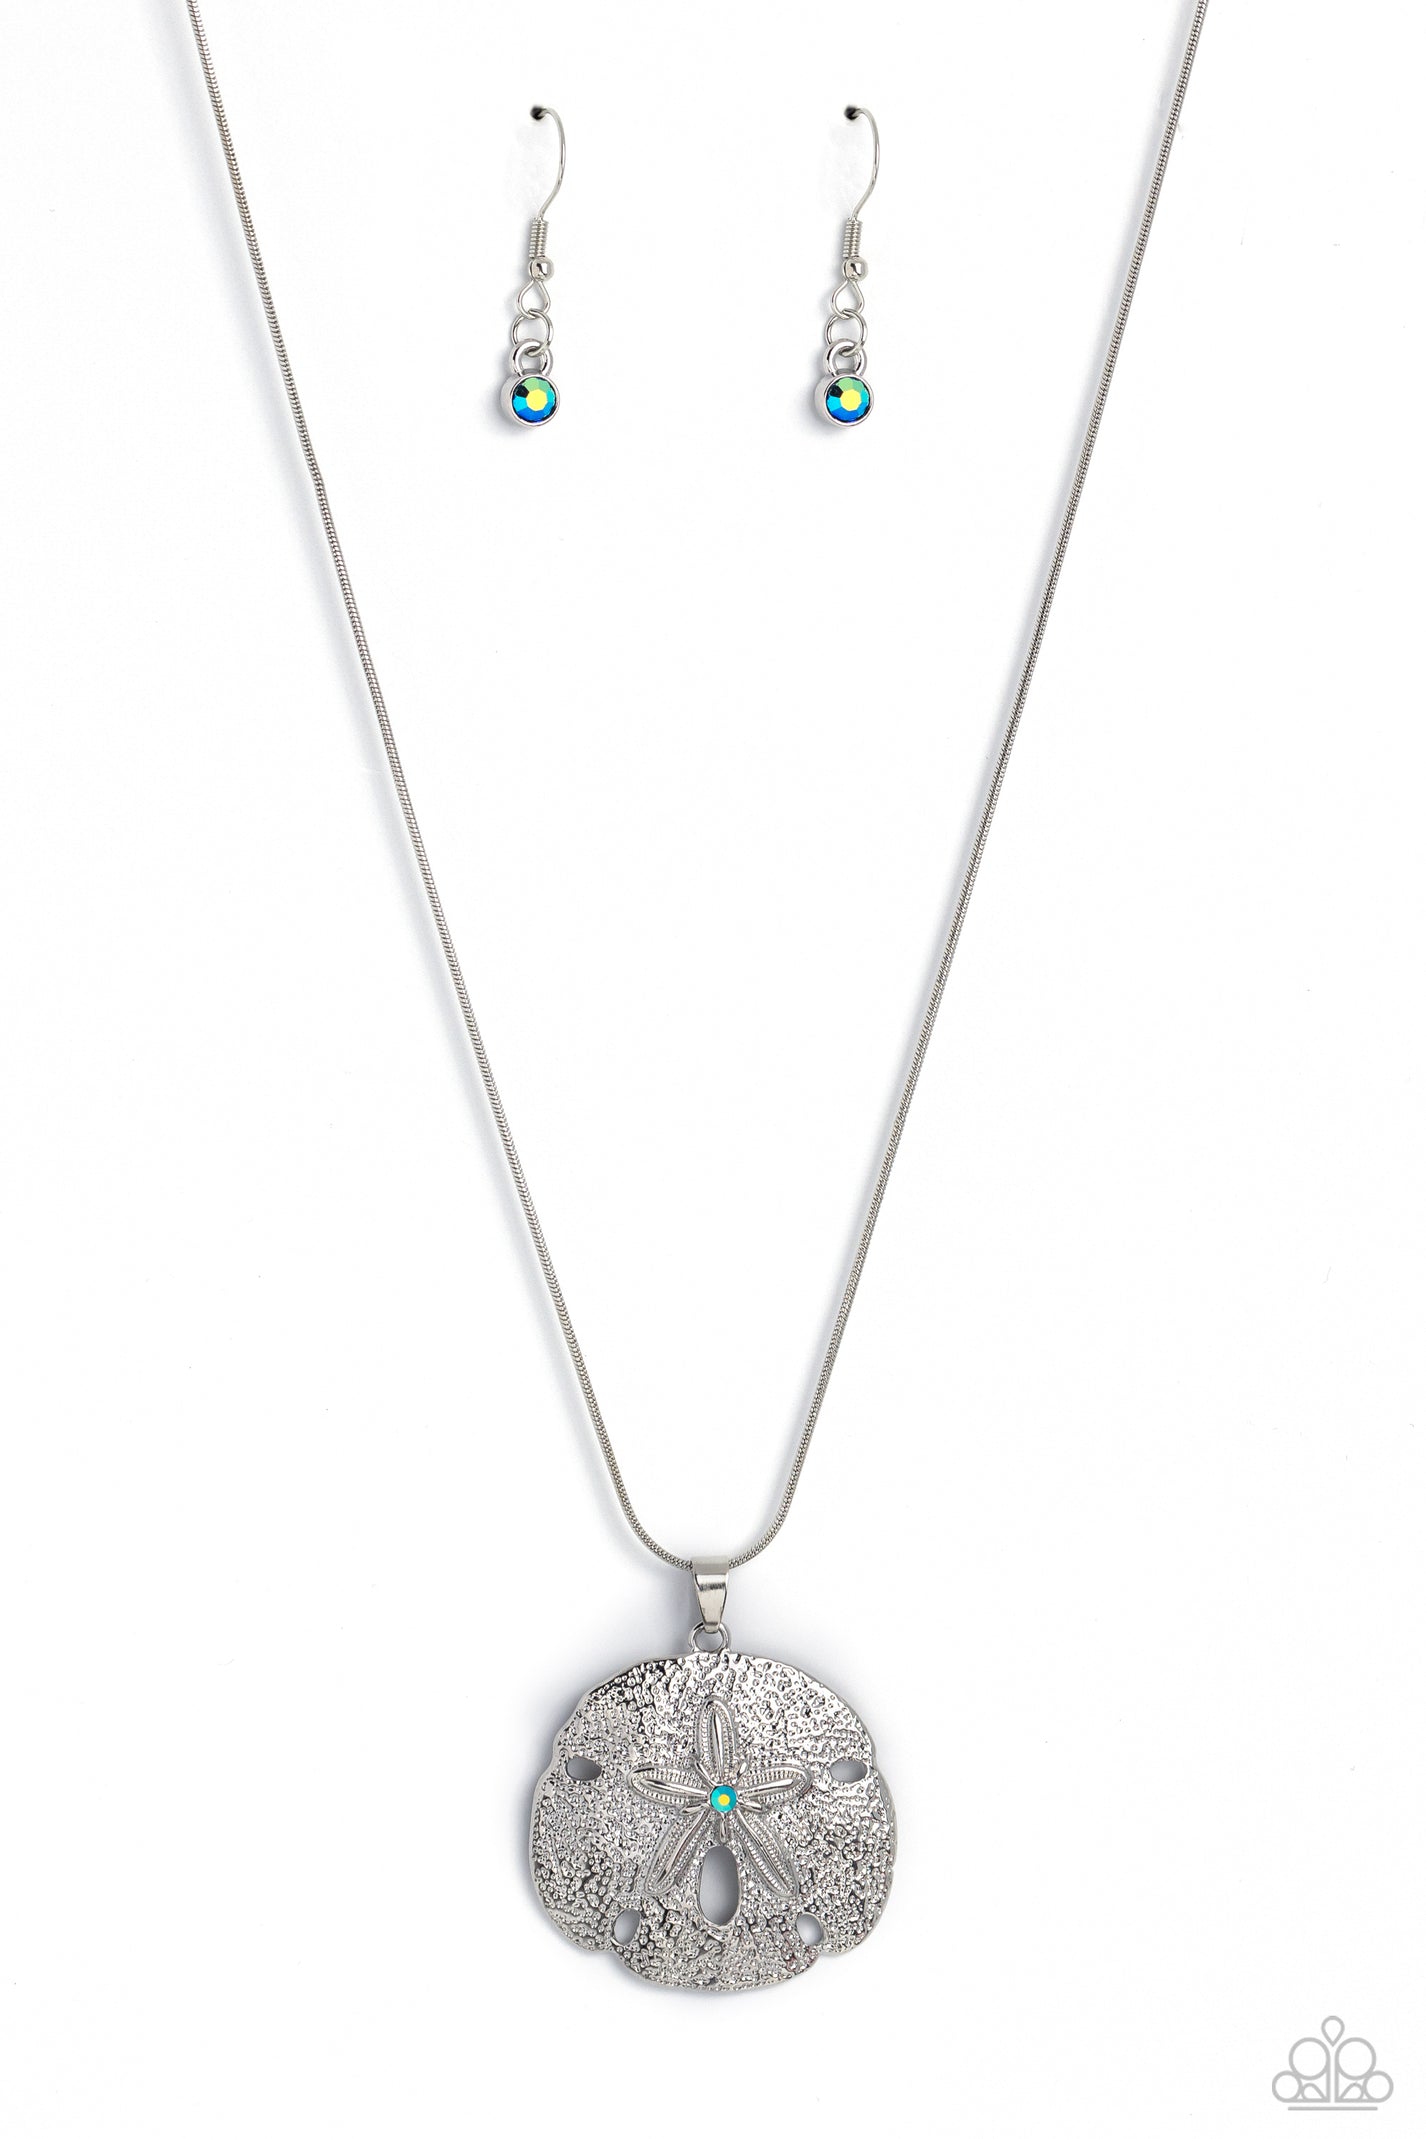 Seize the Sand Dollar - green - Paparazzi necklace – JewelryBlingThing